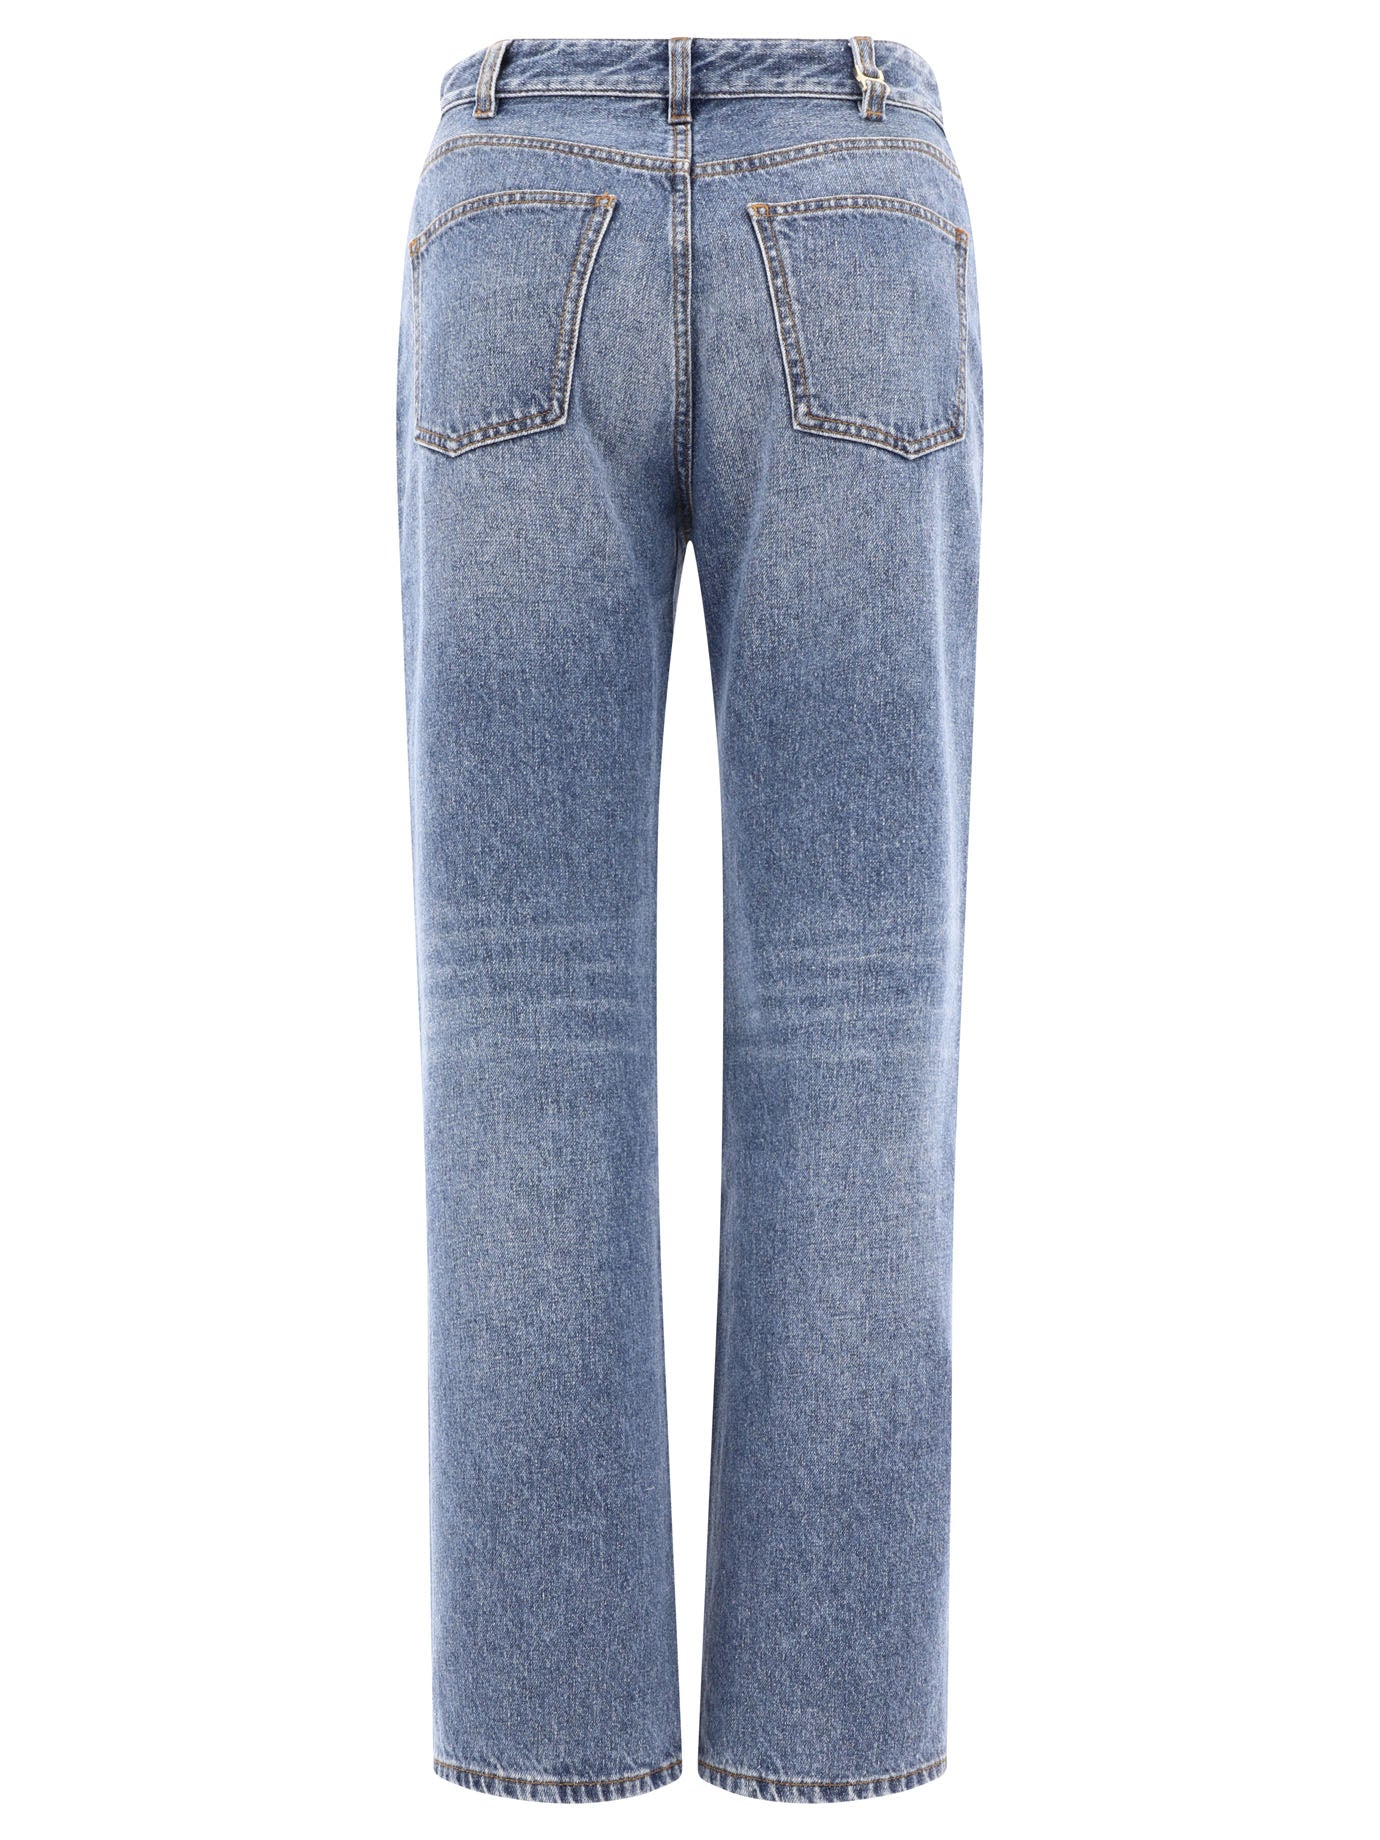 Chloe Ladies Patchwork Flared High-Waisted Jeans, Brand Size 42 (US Size 10)  CHC22UDP011504ZA - Apparel - Jomashop